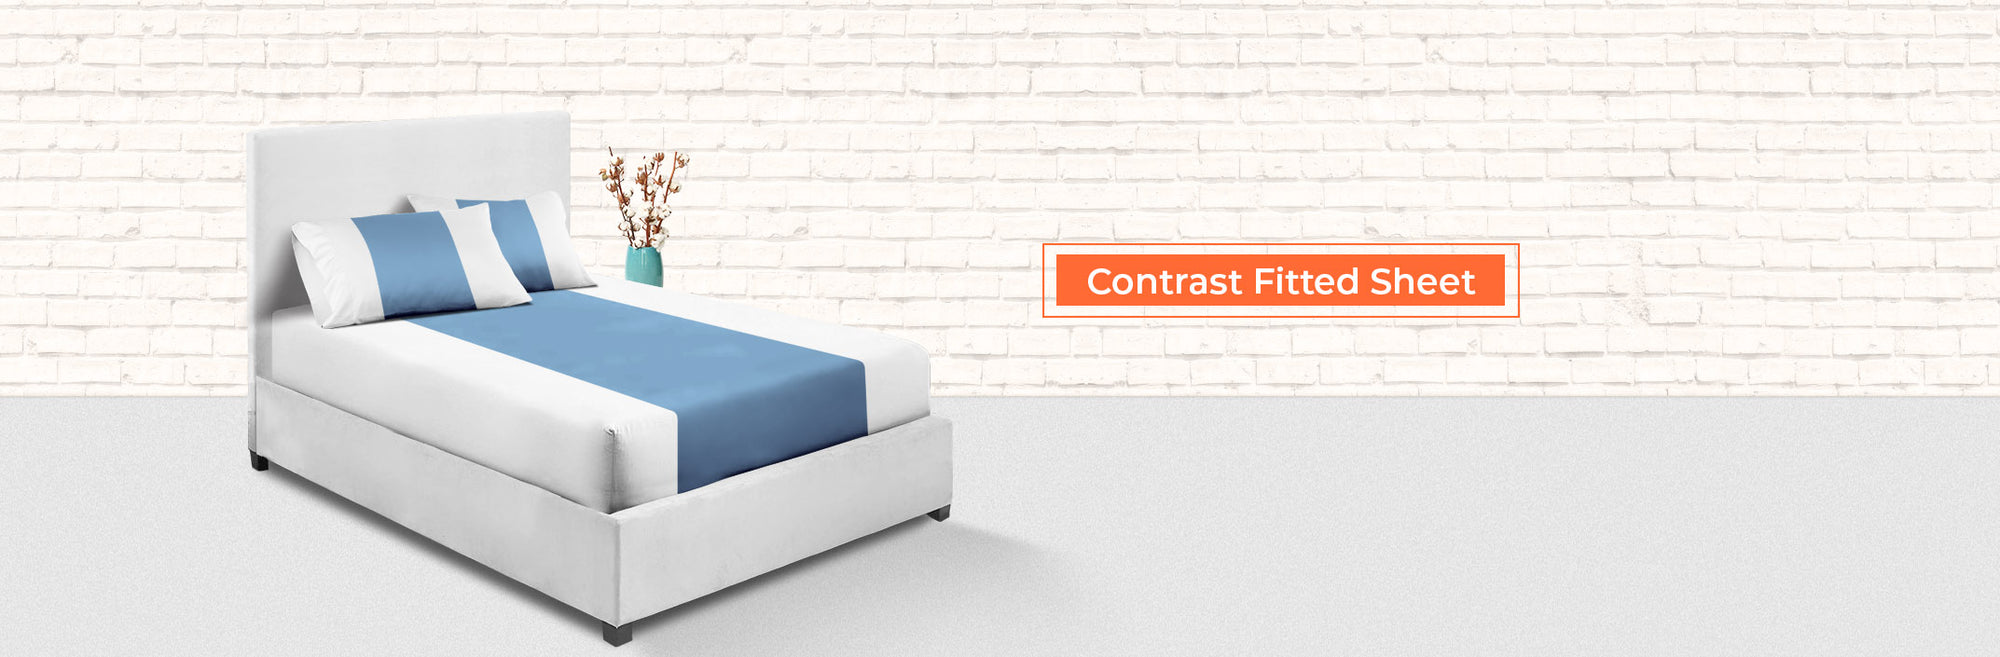 Contrast Fitted Sheets